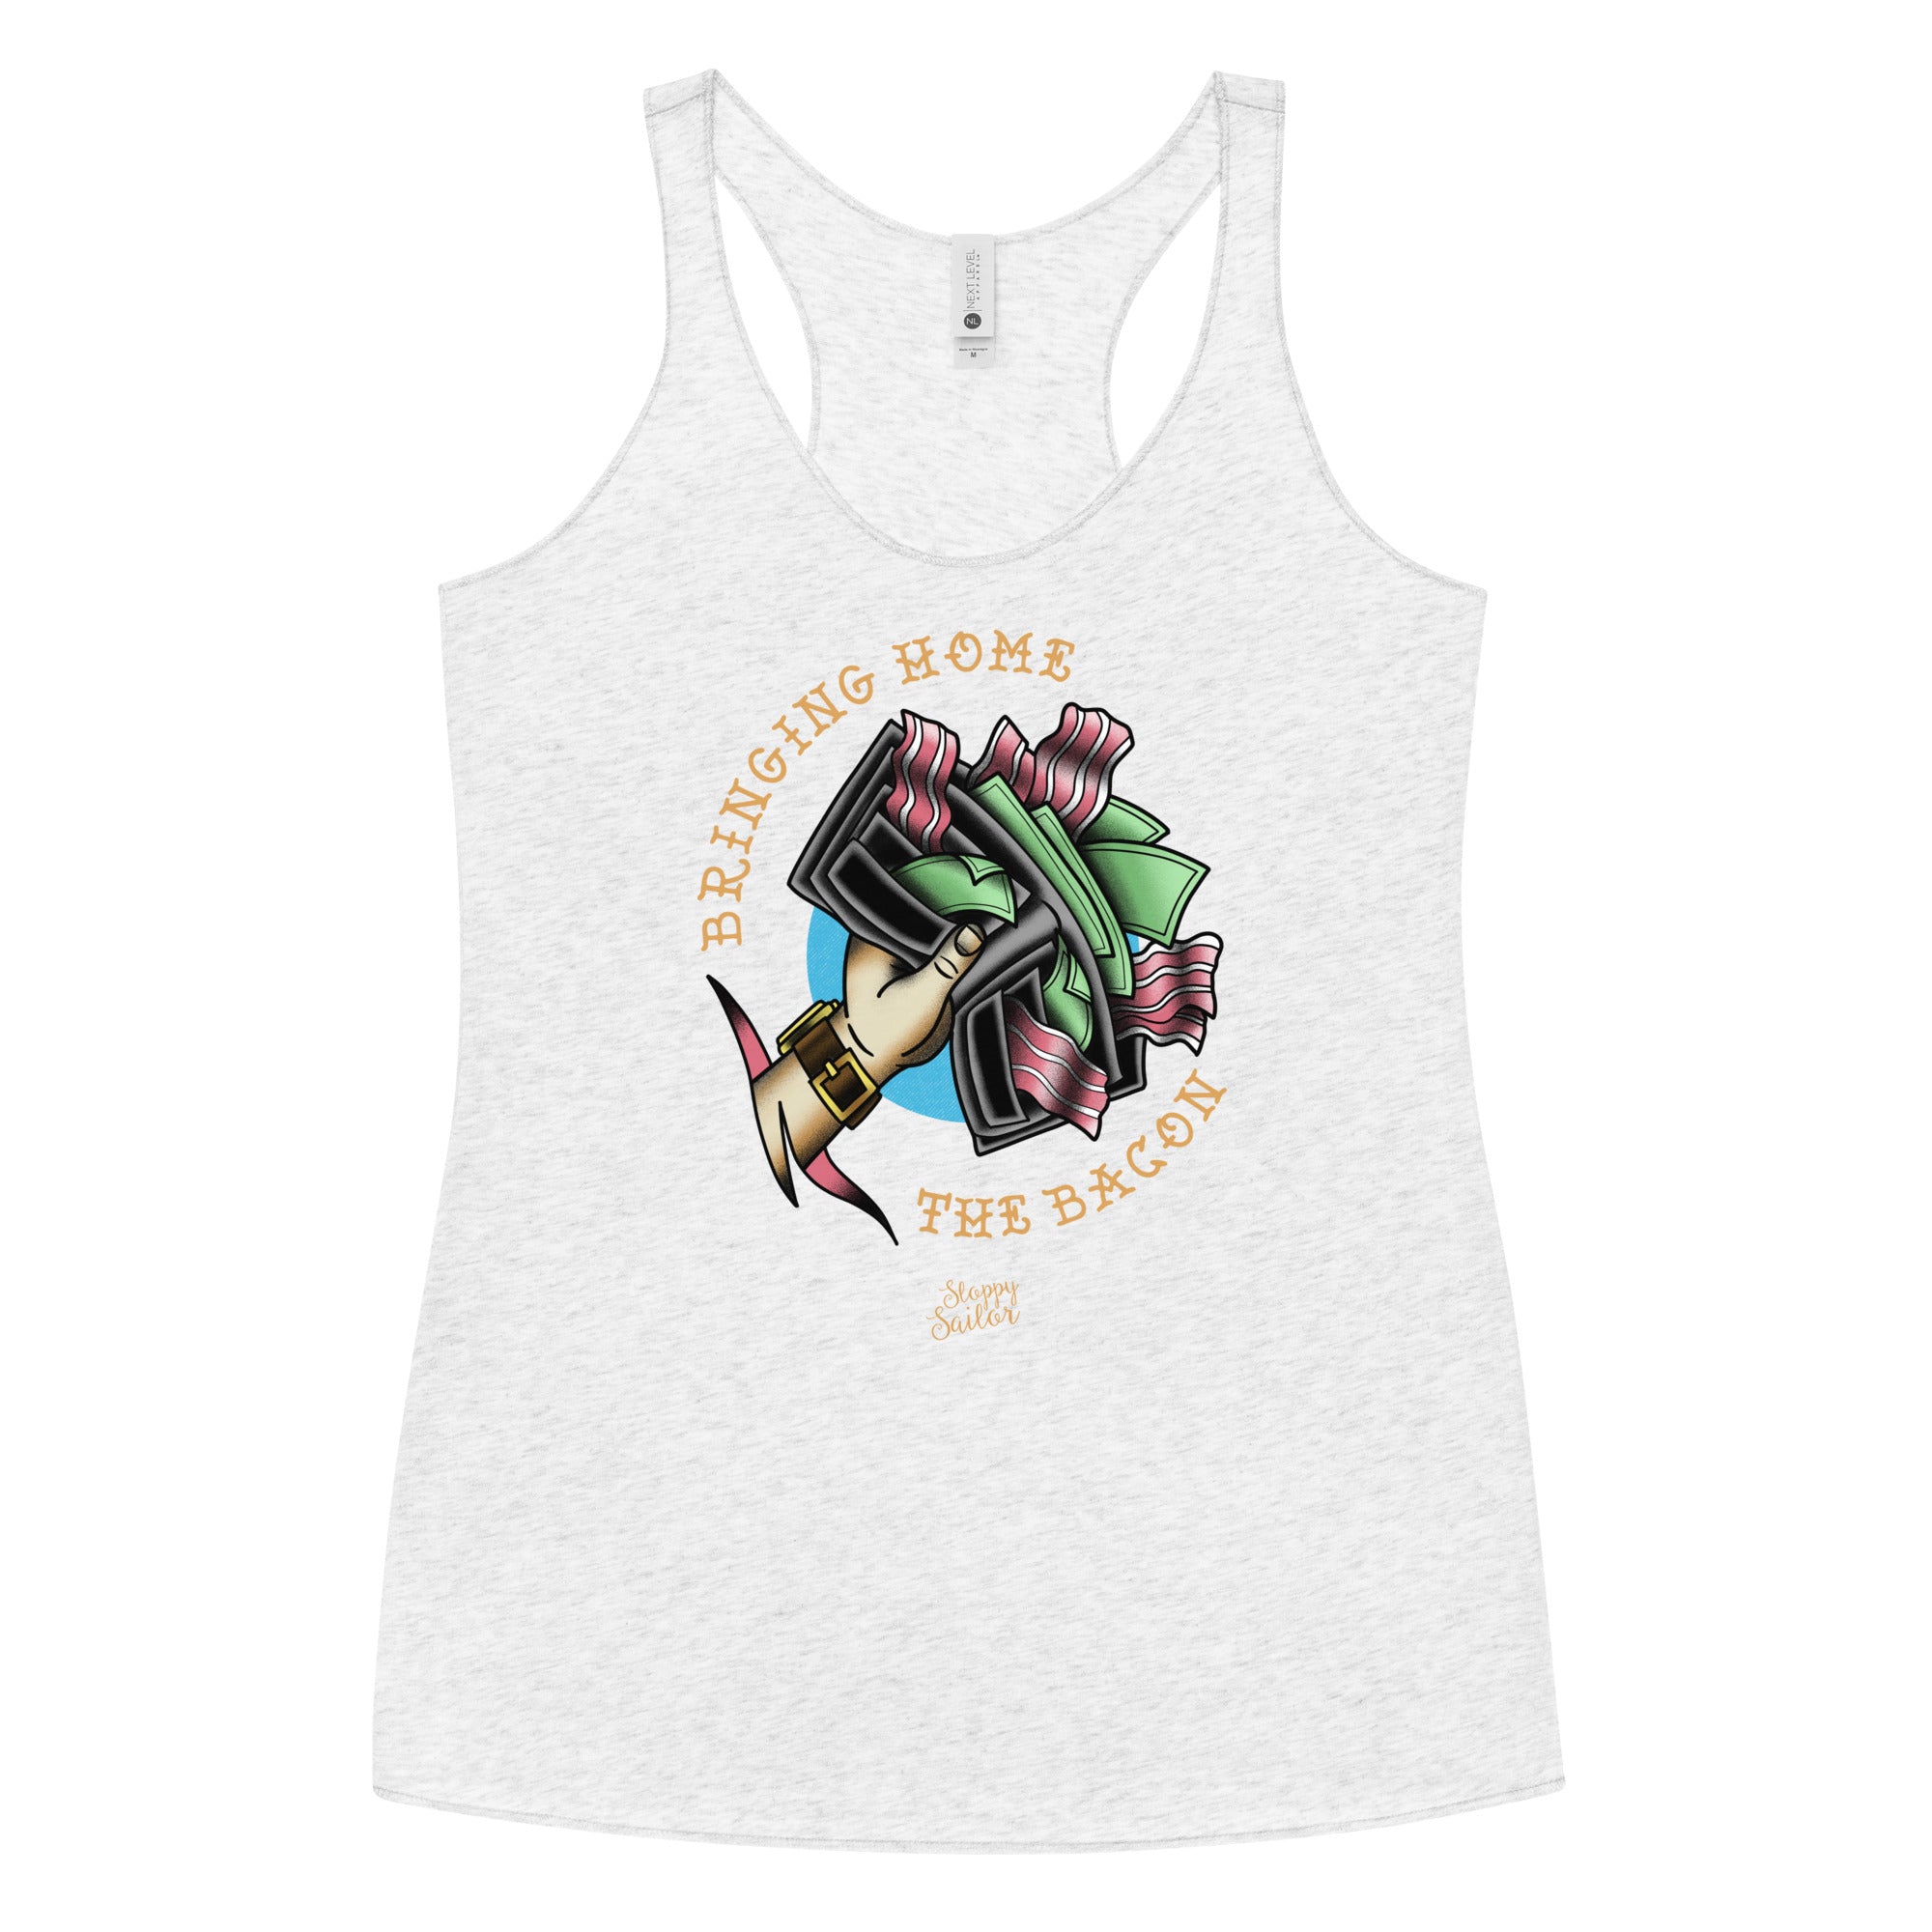 BRINGING HOME THE BACON - Tank Top Woman